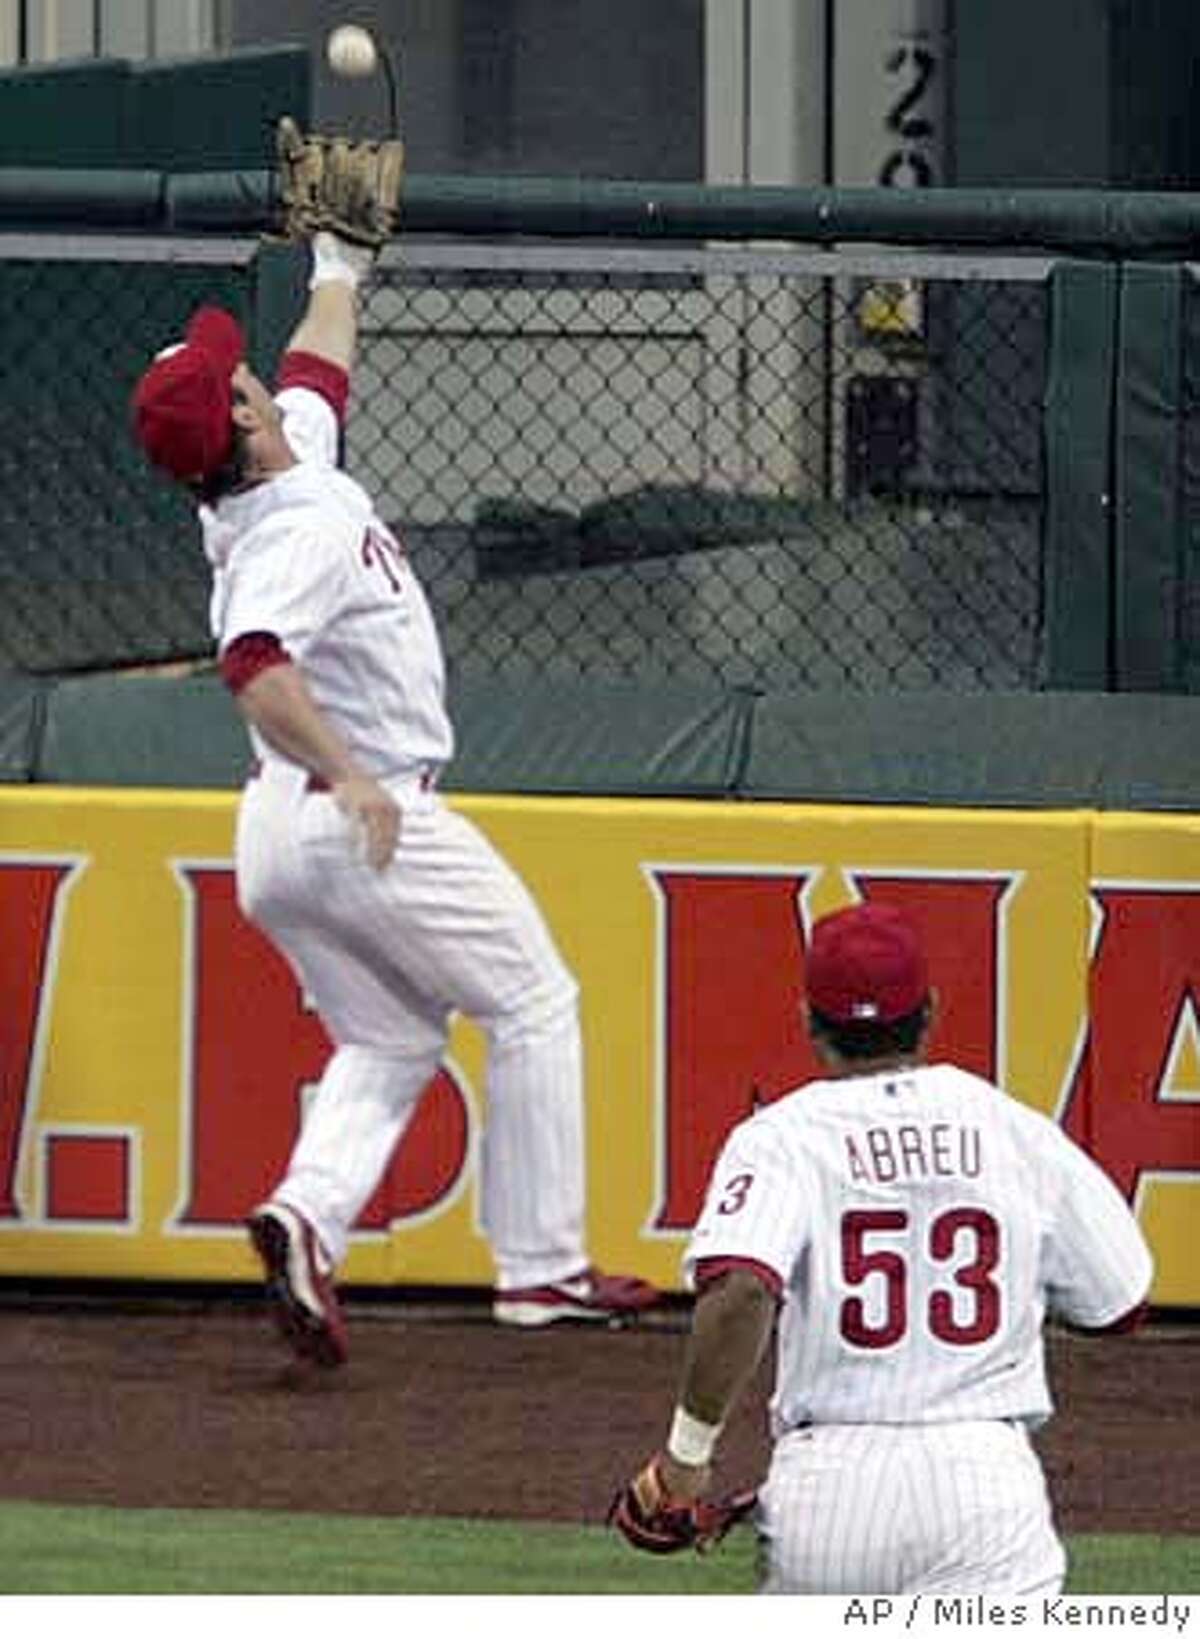 Philadlephia Phillies' Bobby Abreu, right, watches as teammate center fielder Aaron Rowand makes a catch against the wall of a drive by New York Mets' Xavier Nady in the first inning of their baseball game Thursday, May 11, 2006, in Philadelphia. Rowand was injured and left the game. (AP Photo/Miles Kennedy)